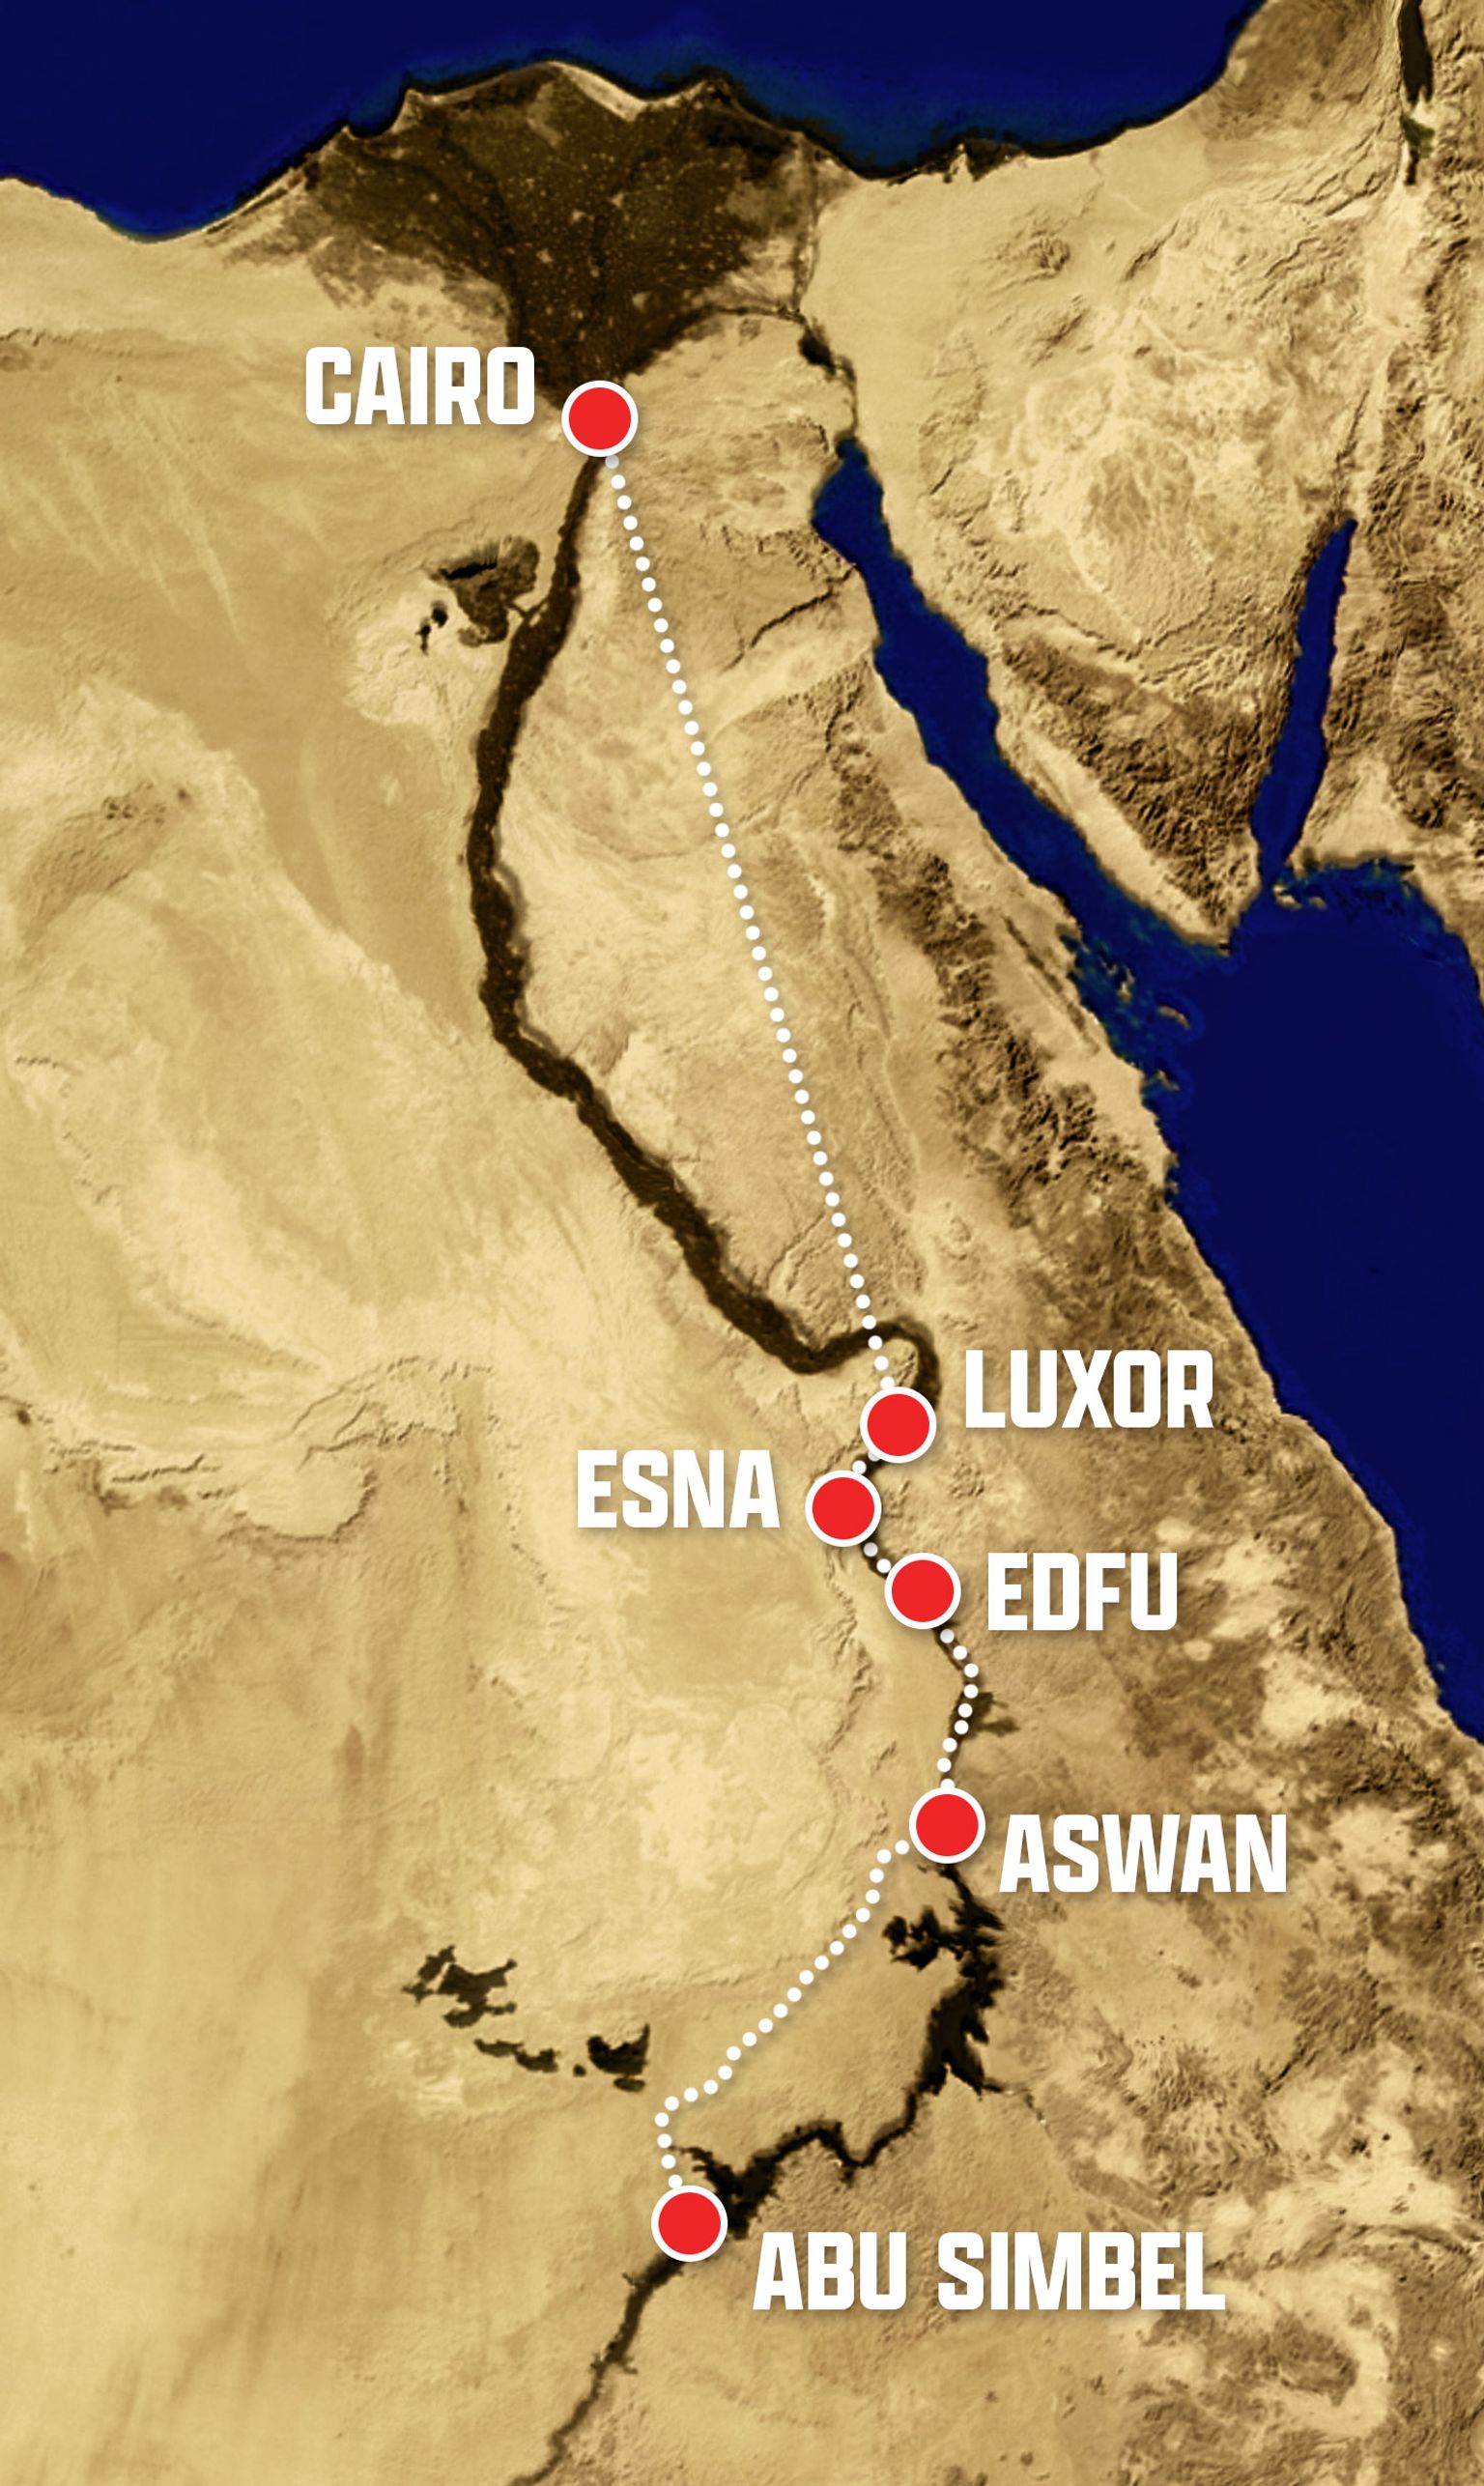 Map of egypt and the places where the tour will take place.